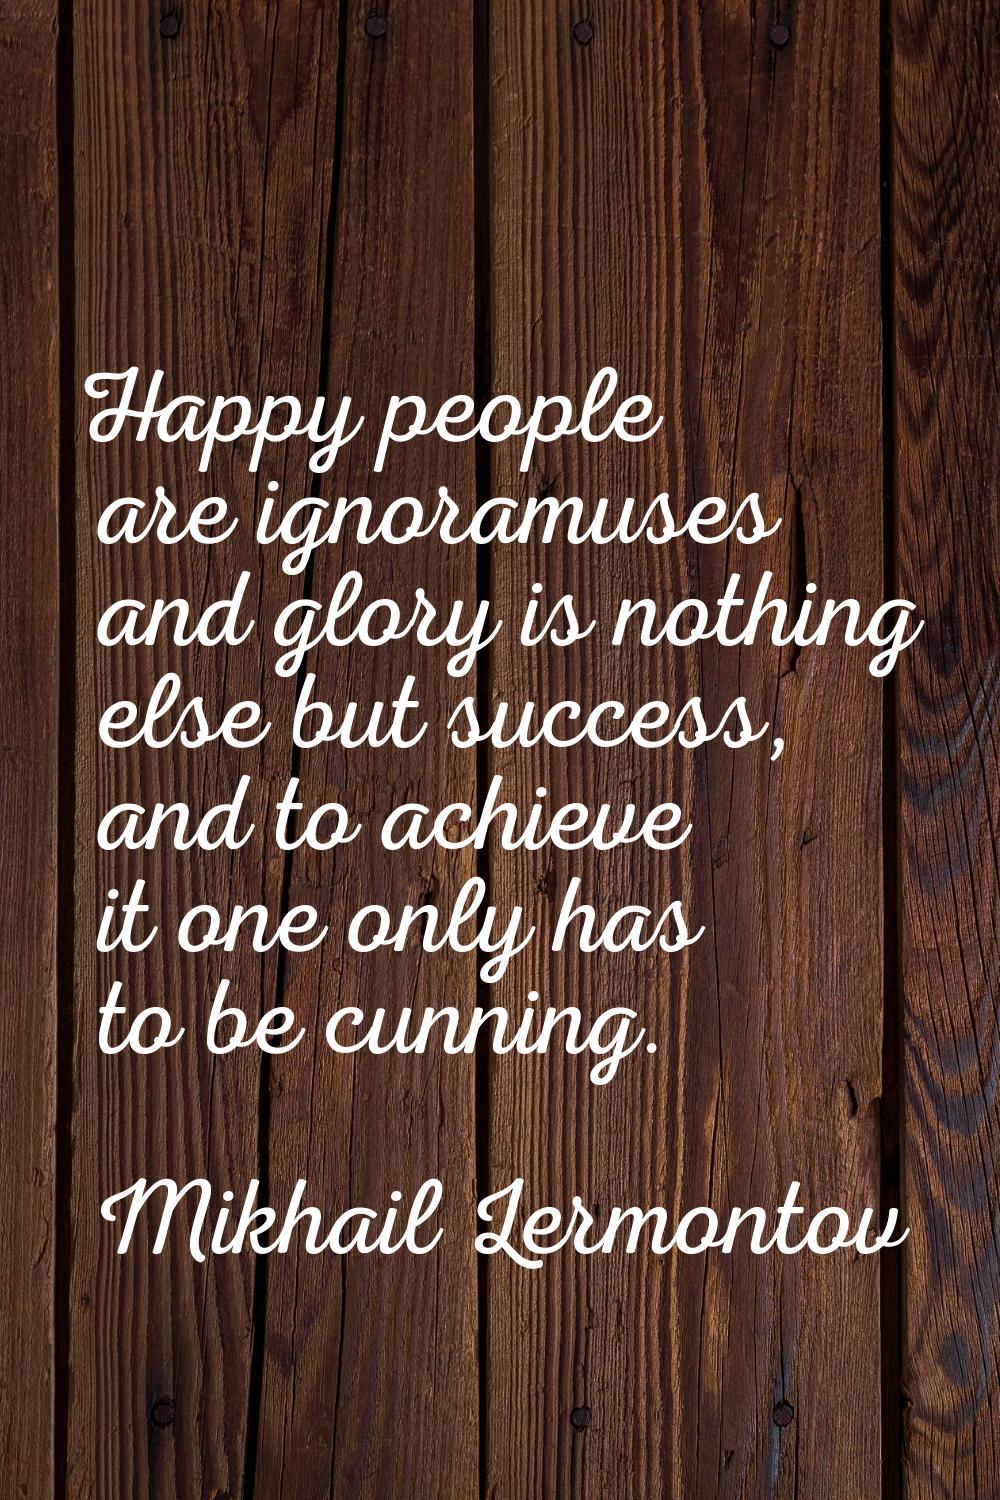 Happy people are ignoramuses and glory is nothing else but success, and to achieve it one only has 